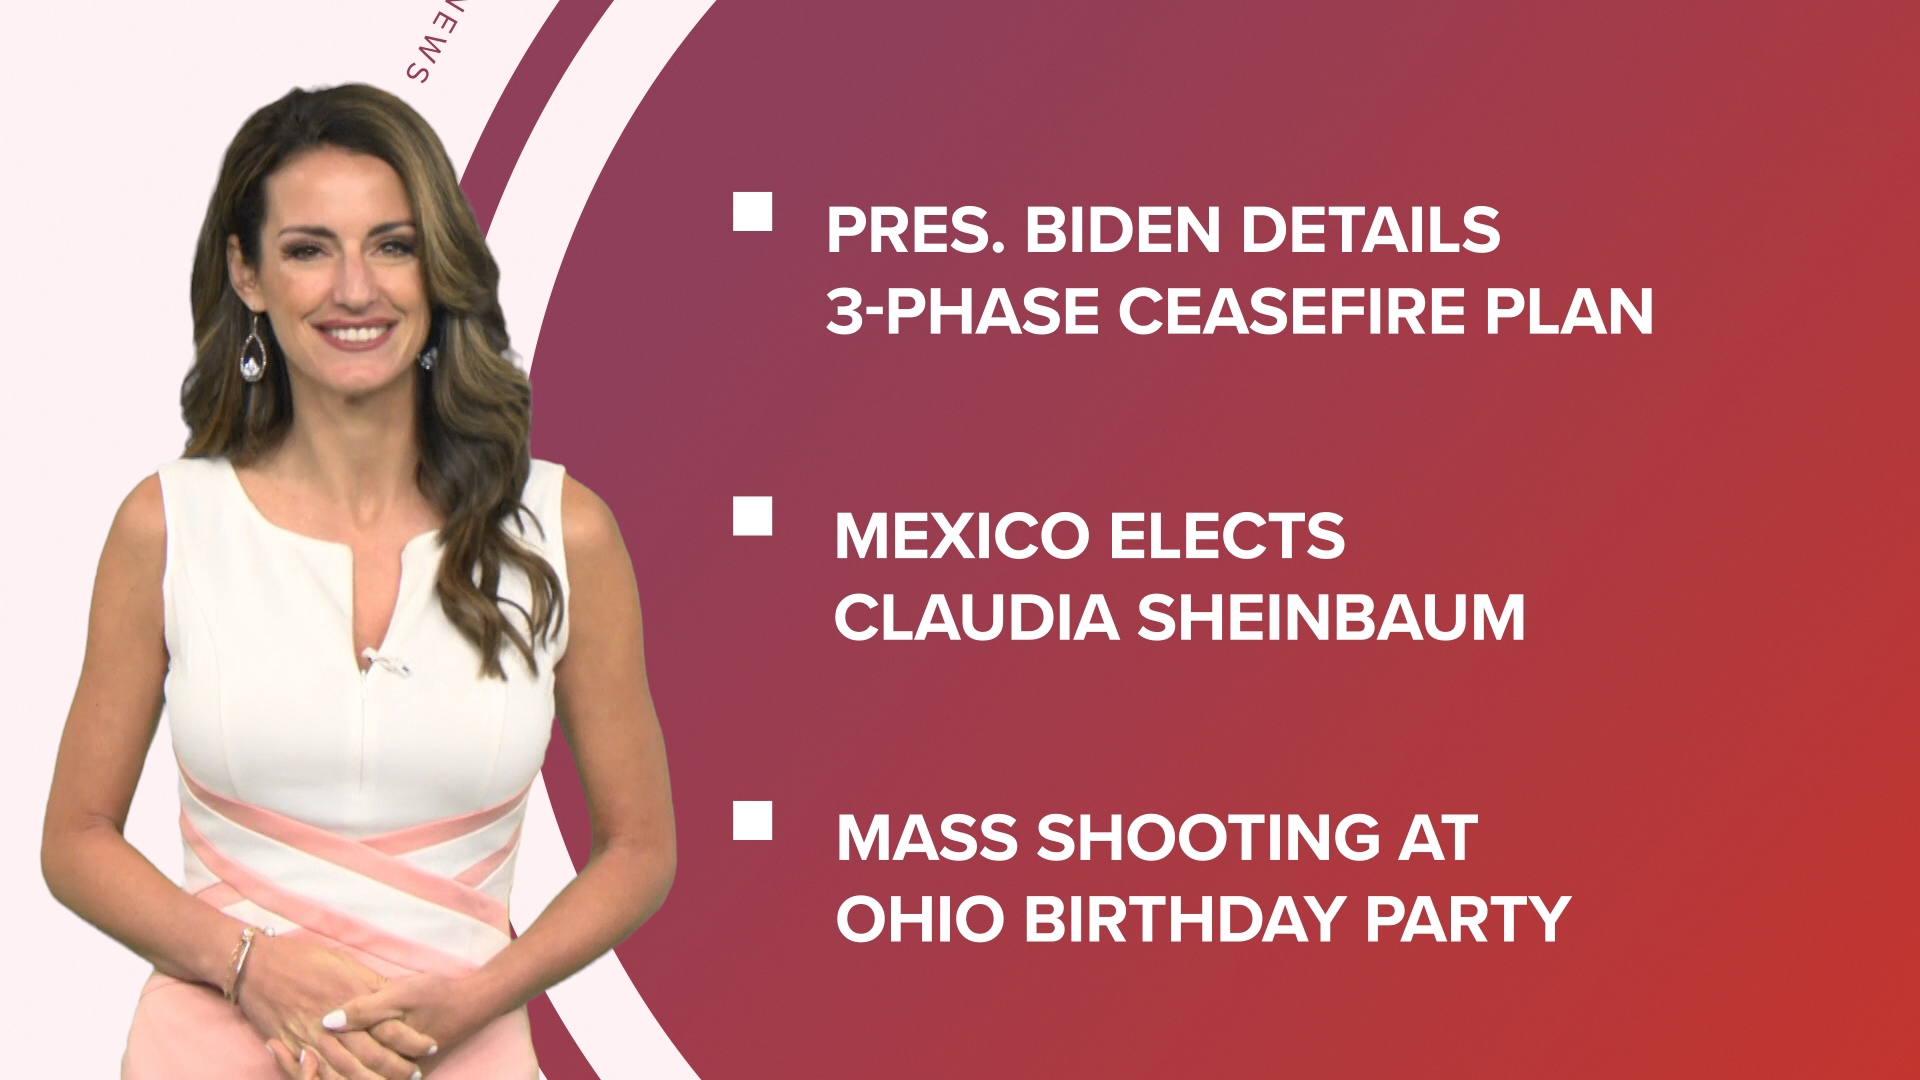 A look at what is happening in the news from Pres. Biden's cease-fire plan and a shark attack to a mass shooting at an Ohio birthday party.